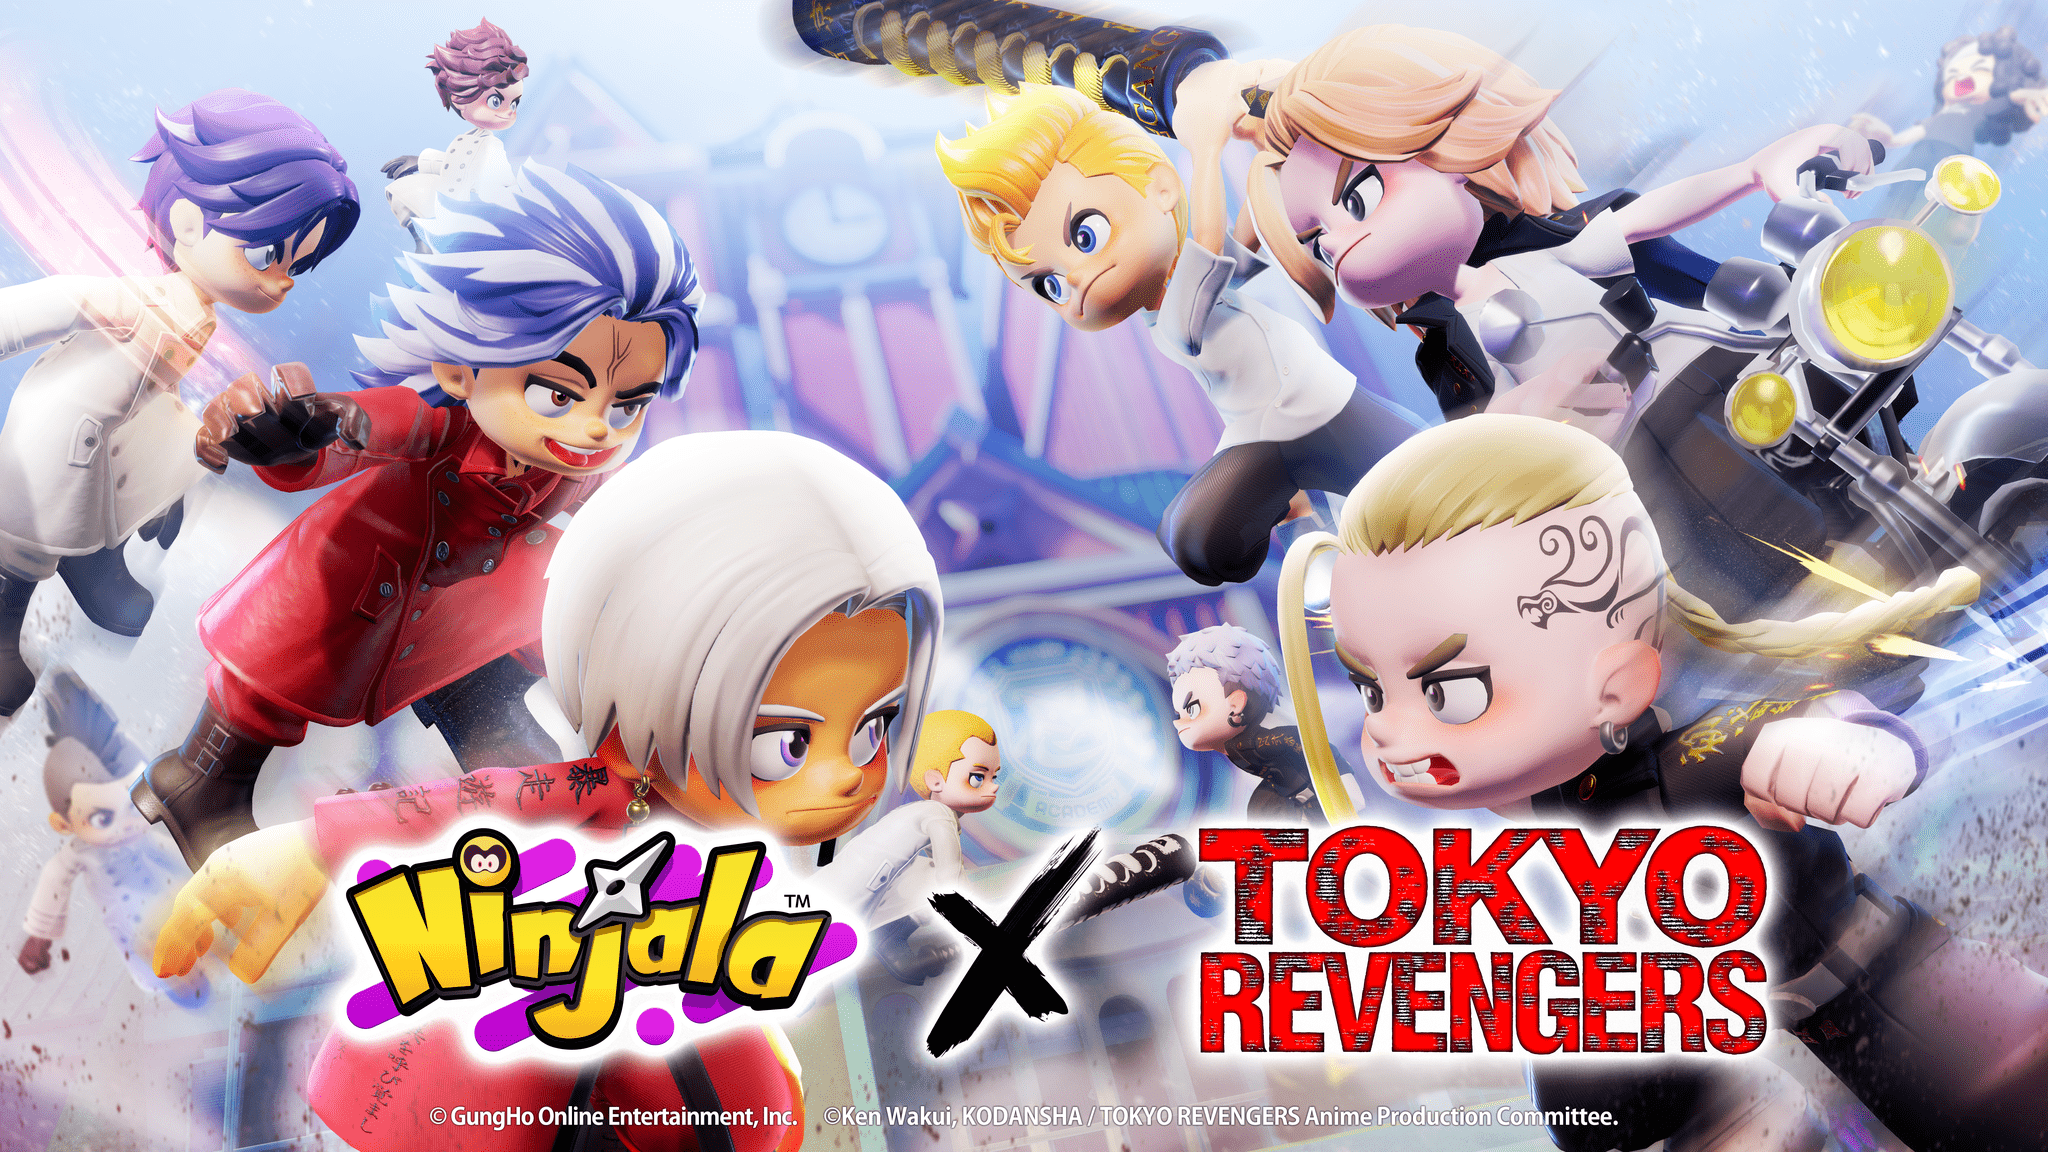 PlayNinjala on X: Our second collaboration with the anime, Tokyo